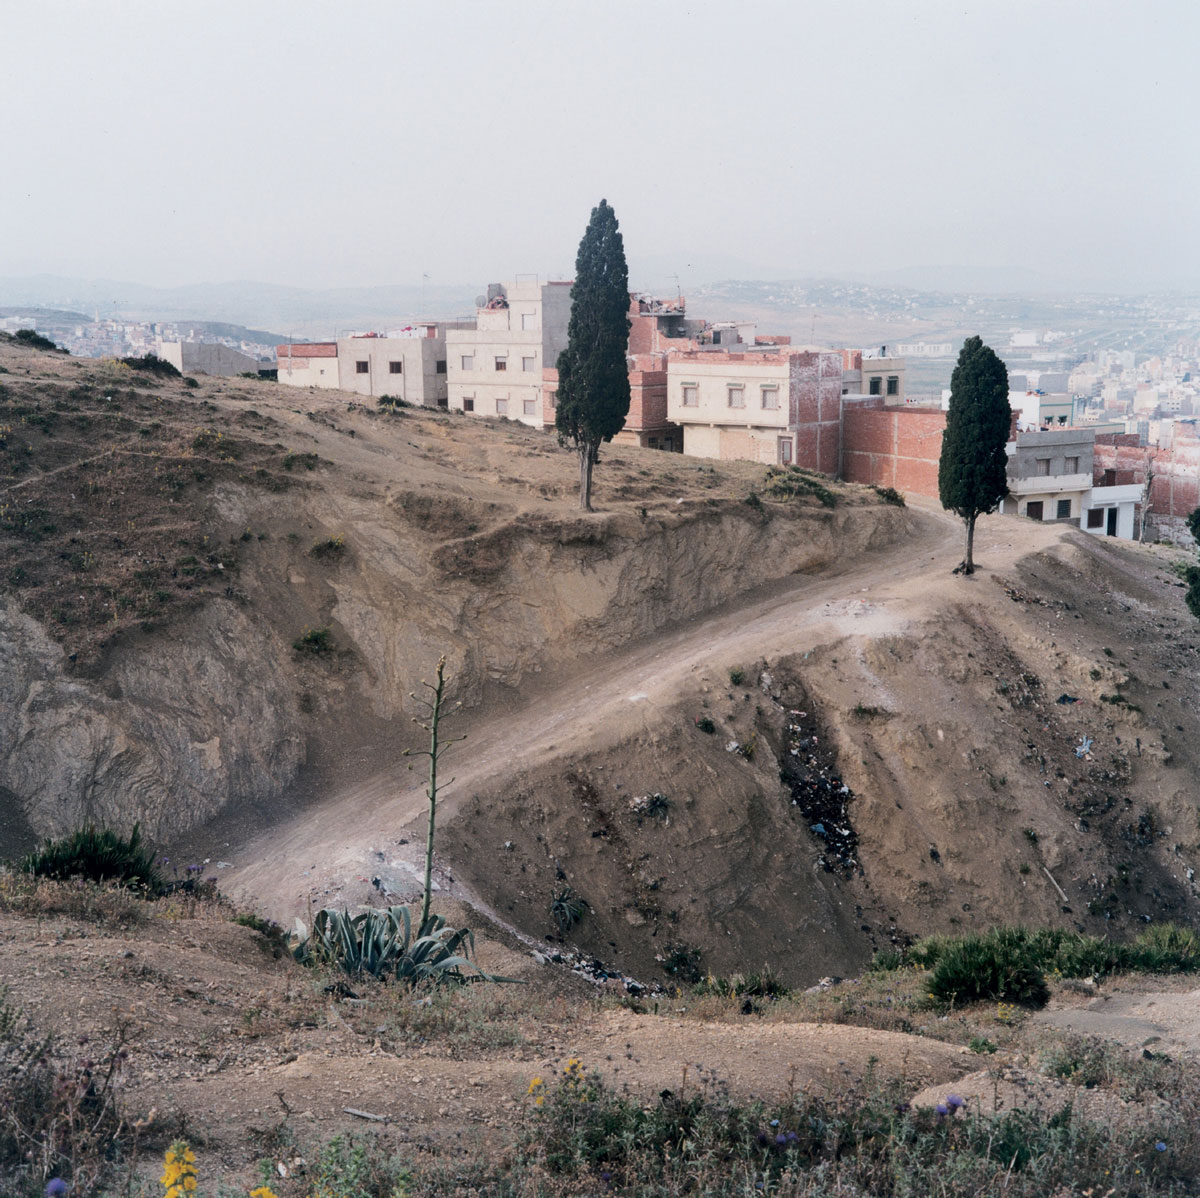 Artist Yto Barrada's 2000 photograph of the site of the tomb of the giant Antaeus, who was killed by Hercules in Tangier, titled 